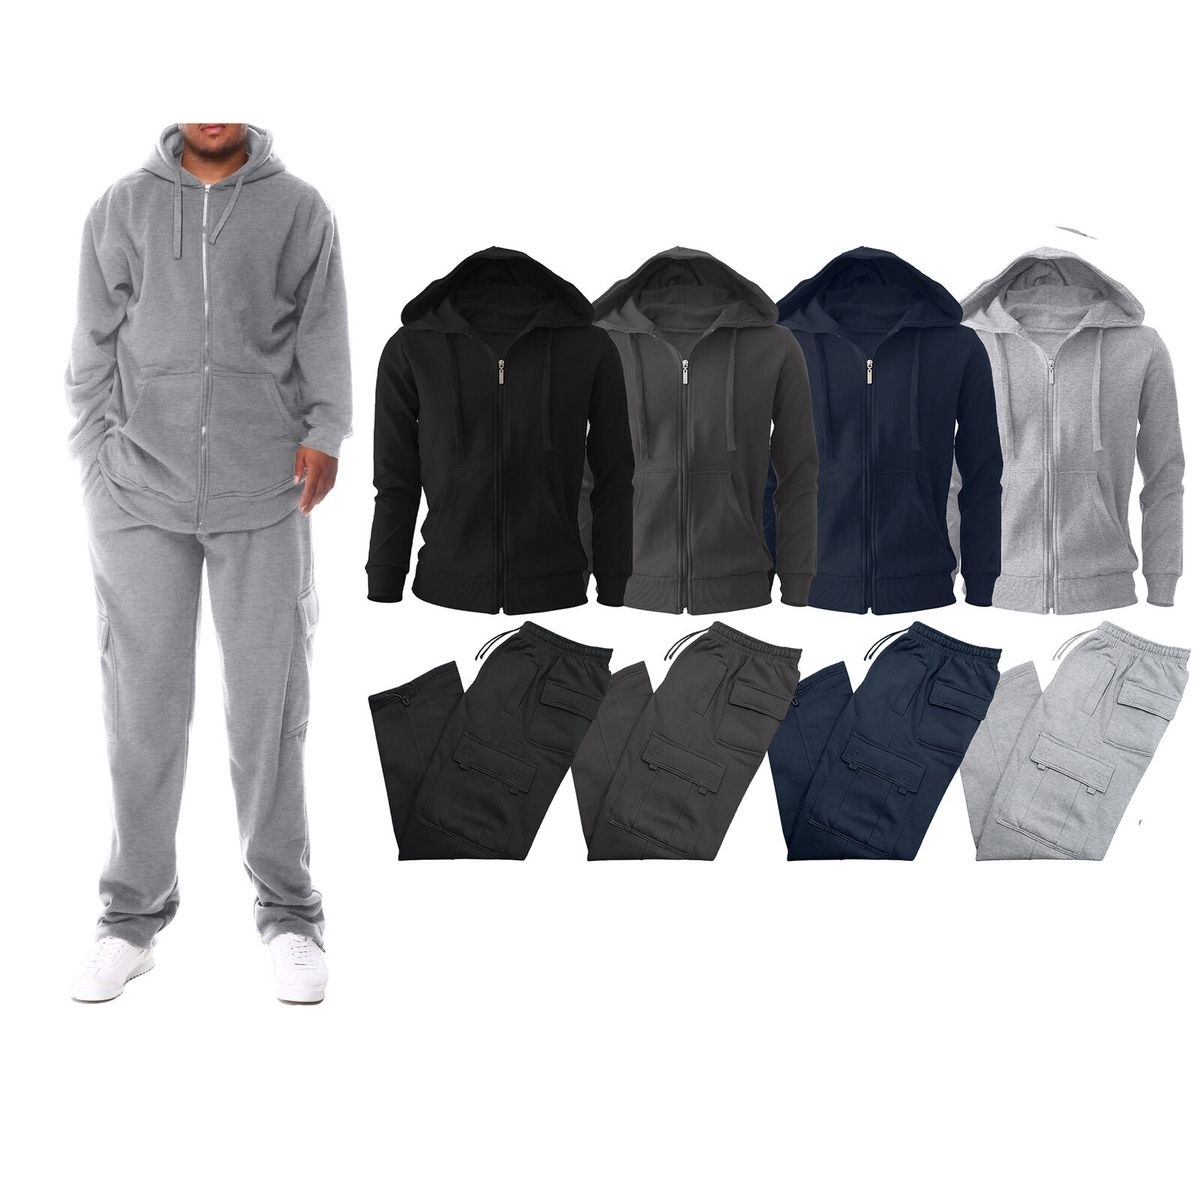 Multi-Pack: Men's Big & Tall Winter Warm Athletic Active Cozy Fleece Lined Multi-Pocket Full Zip Up Cargo Tracksuit - Charcoal, 2-pack, Medi